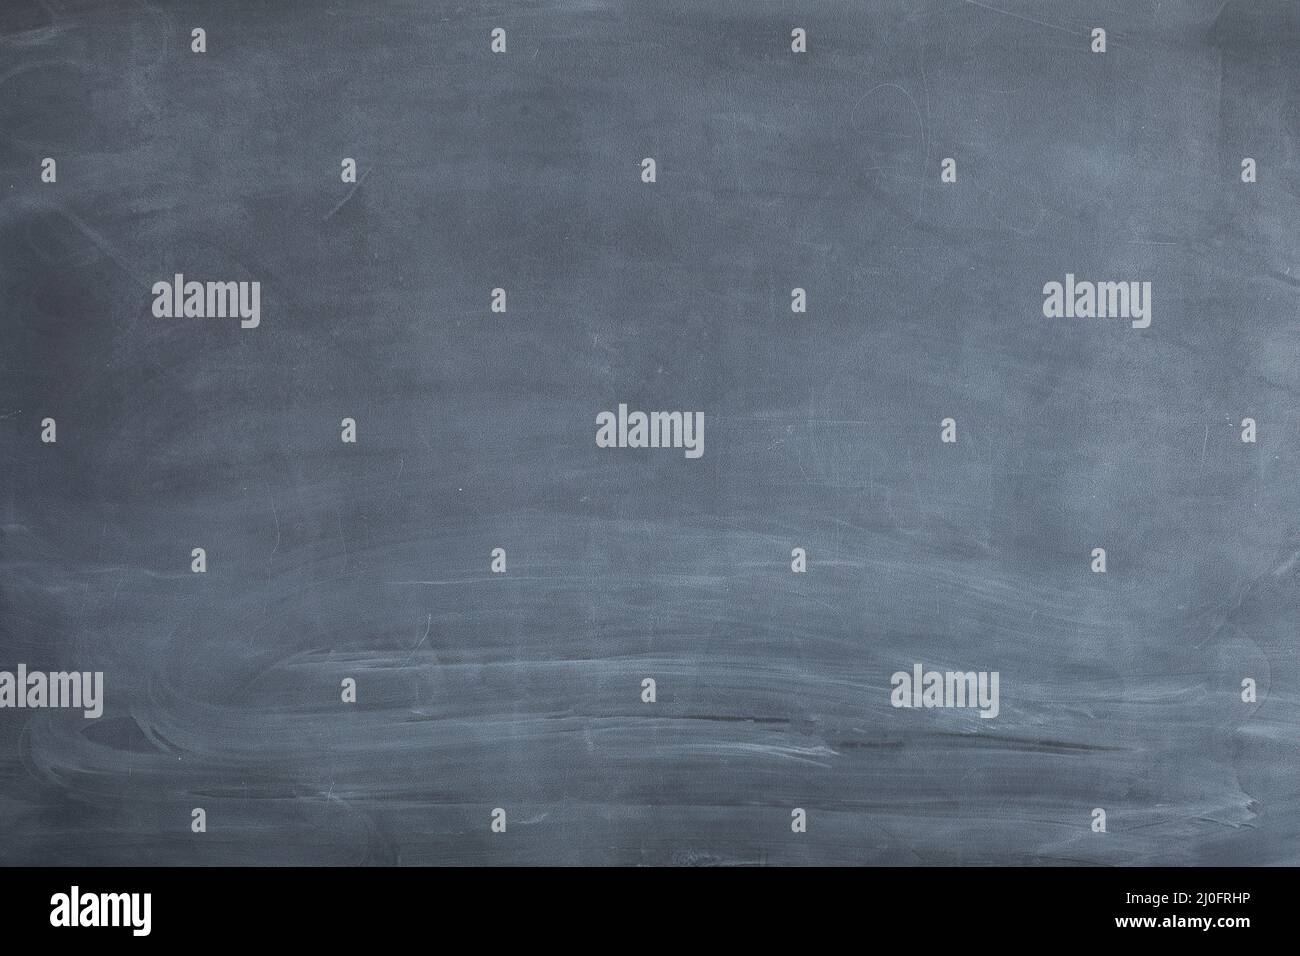 Chalkboard not well sponged. The simplest arithmetic problem in mathematics - adding two numbers together. Stock Photo